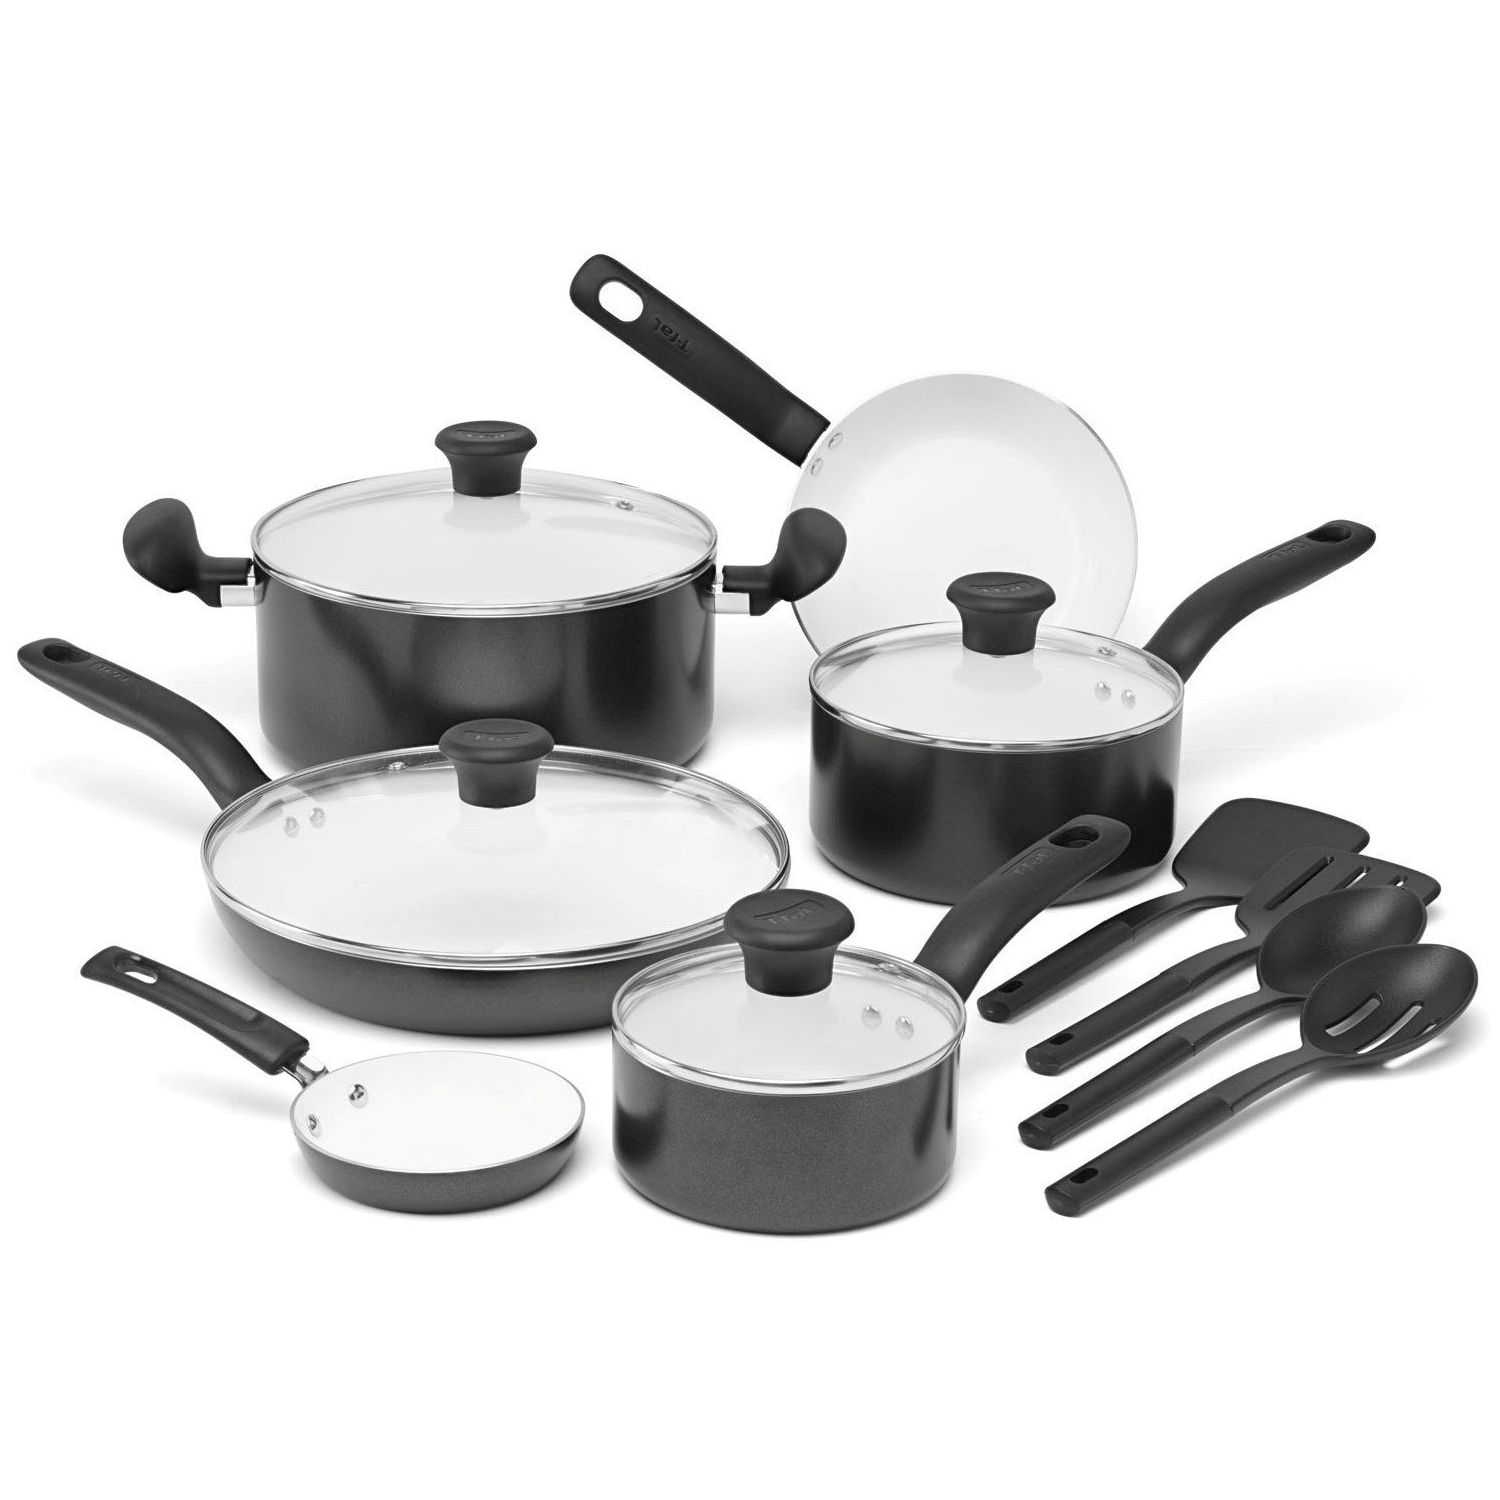 T-Fal Initiatives Ceramic Cookware Review - Cookware Insider